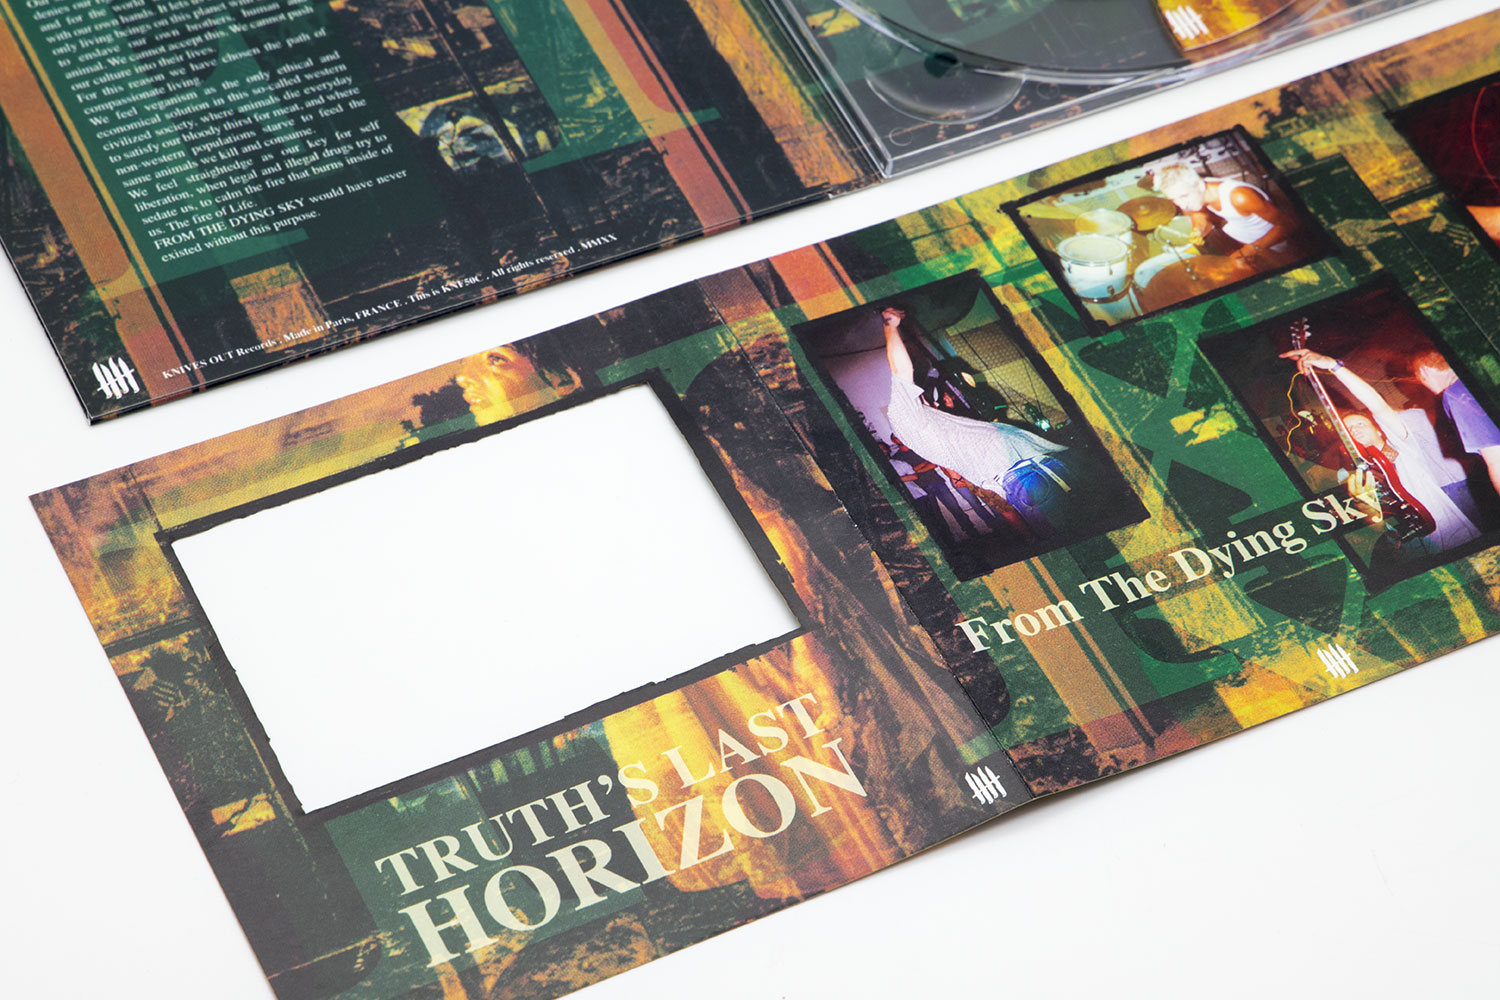 FROM THE DYING SKY "Truth's Last Horizon" Deluxe Digipack clear CD